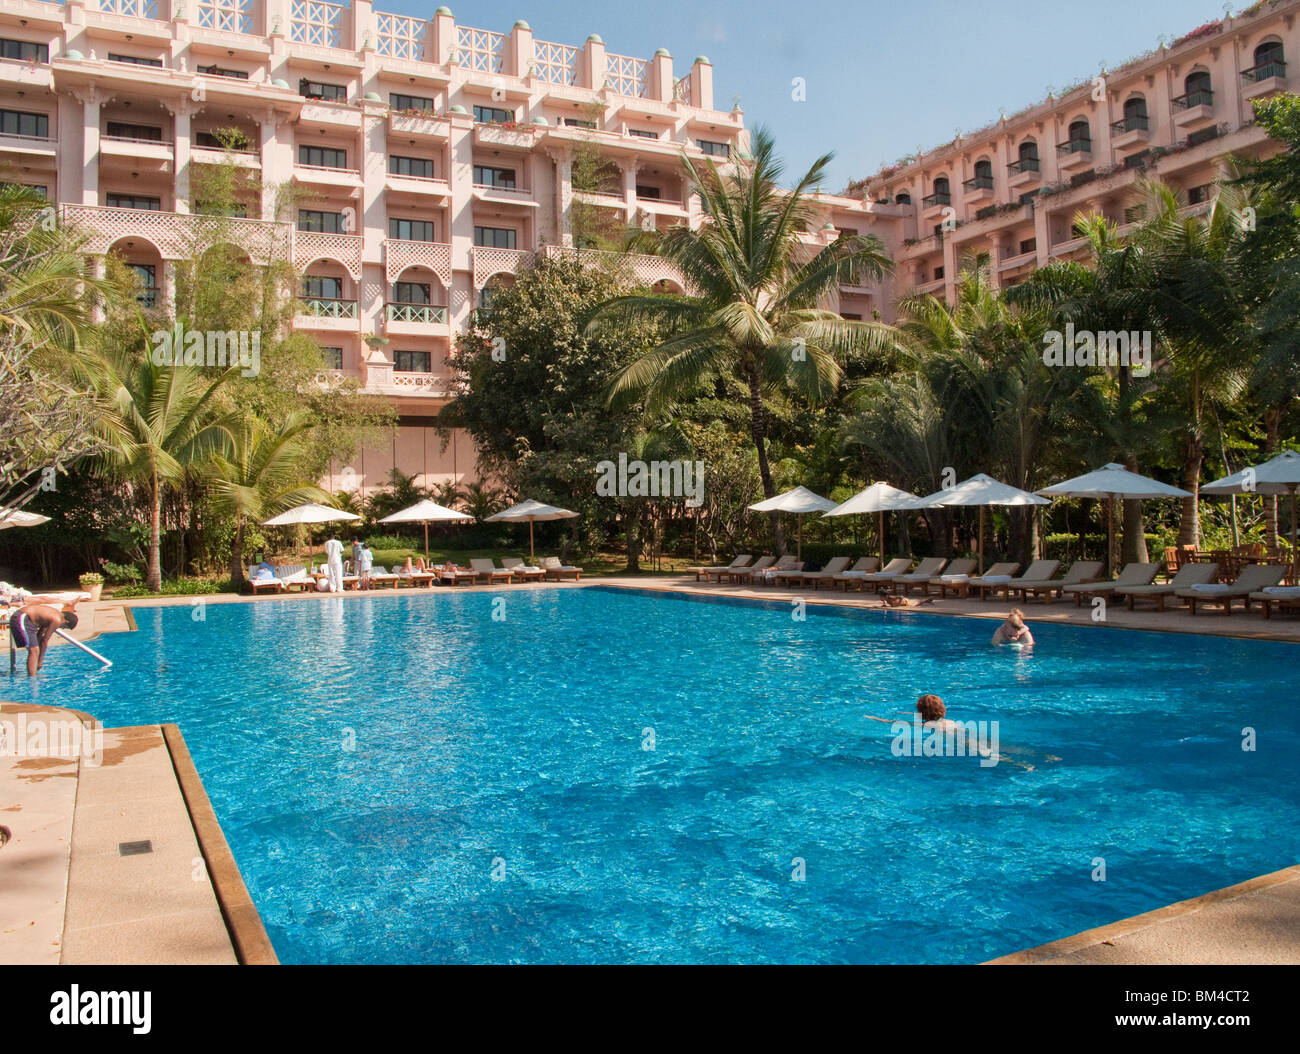 The swimming pool at the Leela Palace Hotel in Bangalore Stock Photo